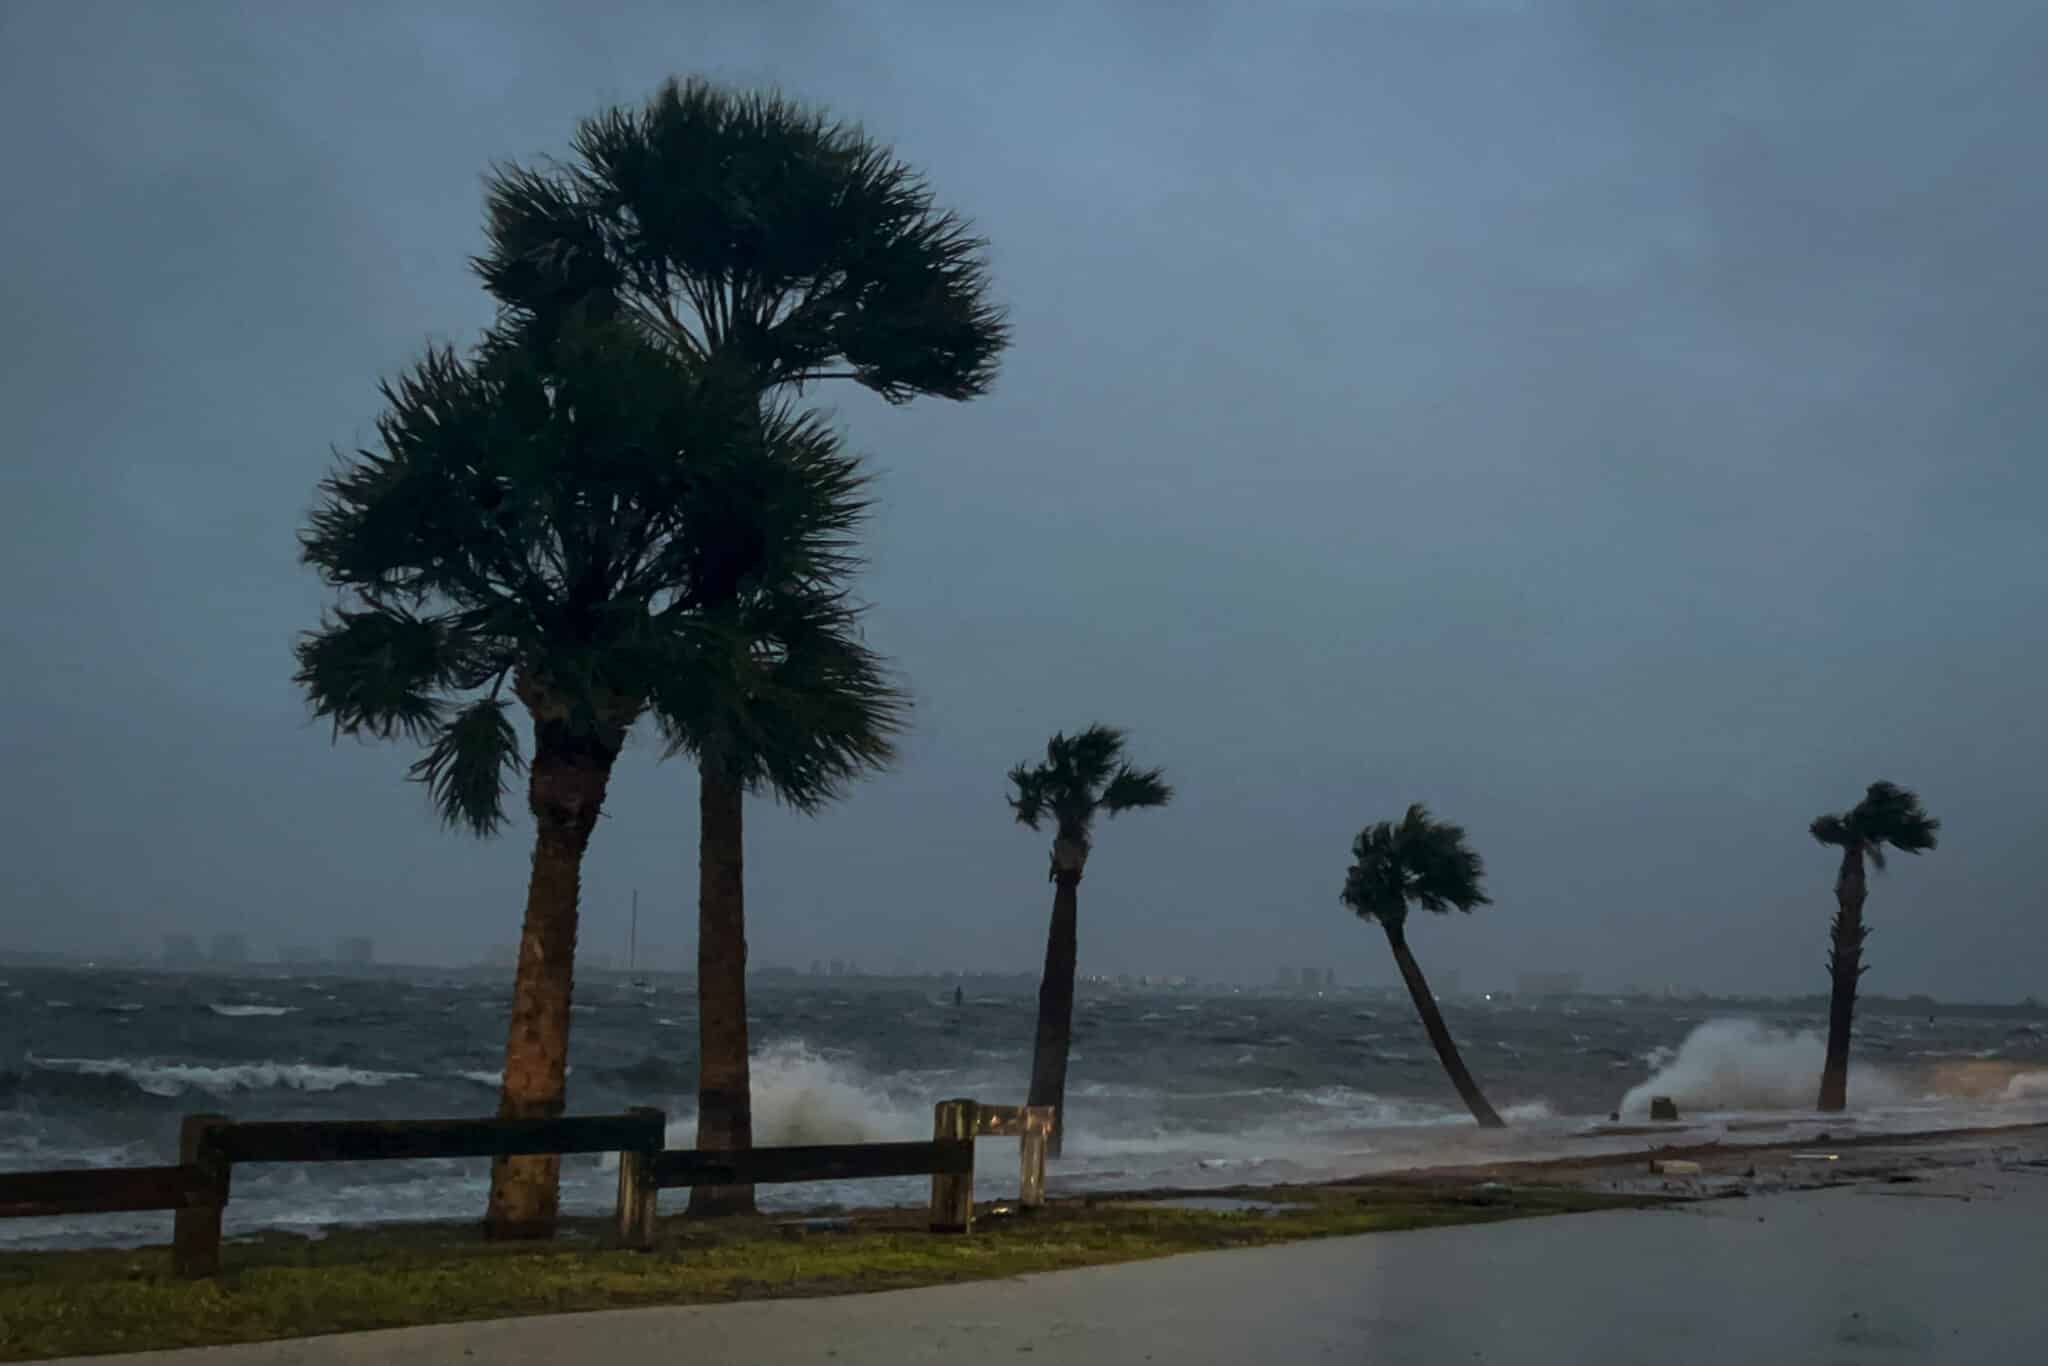 Palm trees are pounded by high tide and winds at Causeway Beach Park before Hurricane Nicole makes landfall in Jensen Beach, Florida on November 9, 2022. - Nicole, now a category 1 hurricane, is expected to make landfall over Florida's coast overnight. (Photo by Eva Marie UZCATEGUI / AFP) (Photo by EVA MARIE UZCATEGUI/AFP via Getty Images)